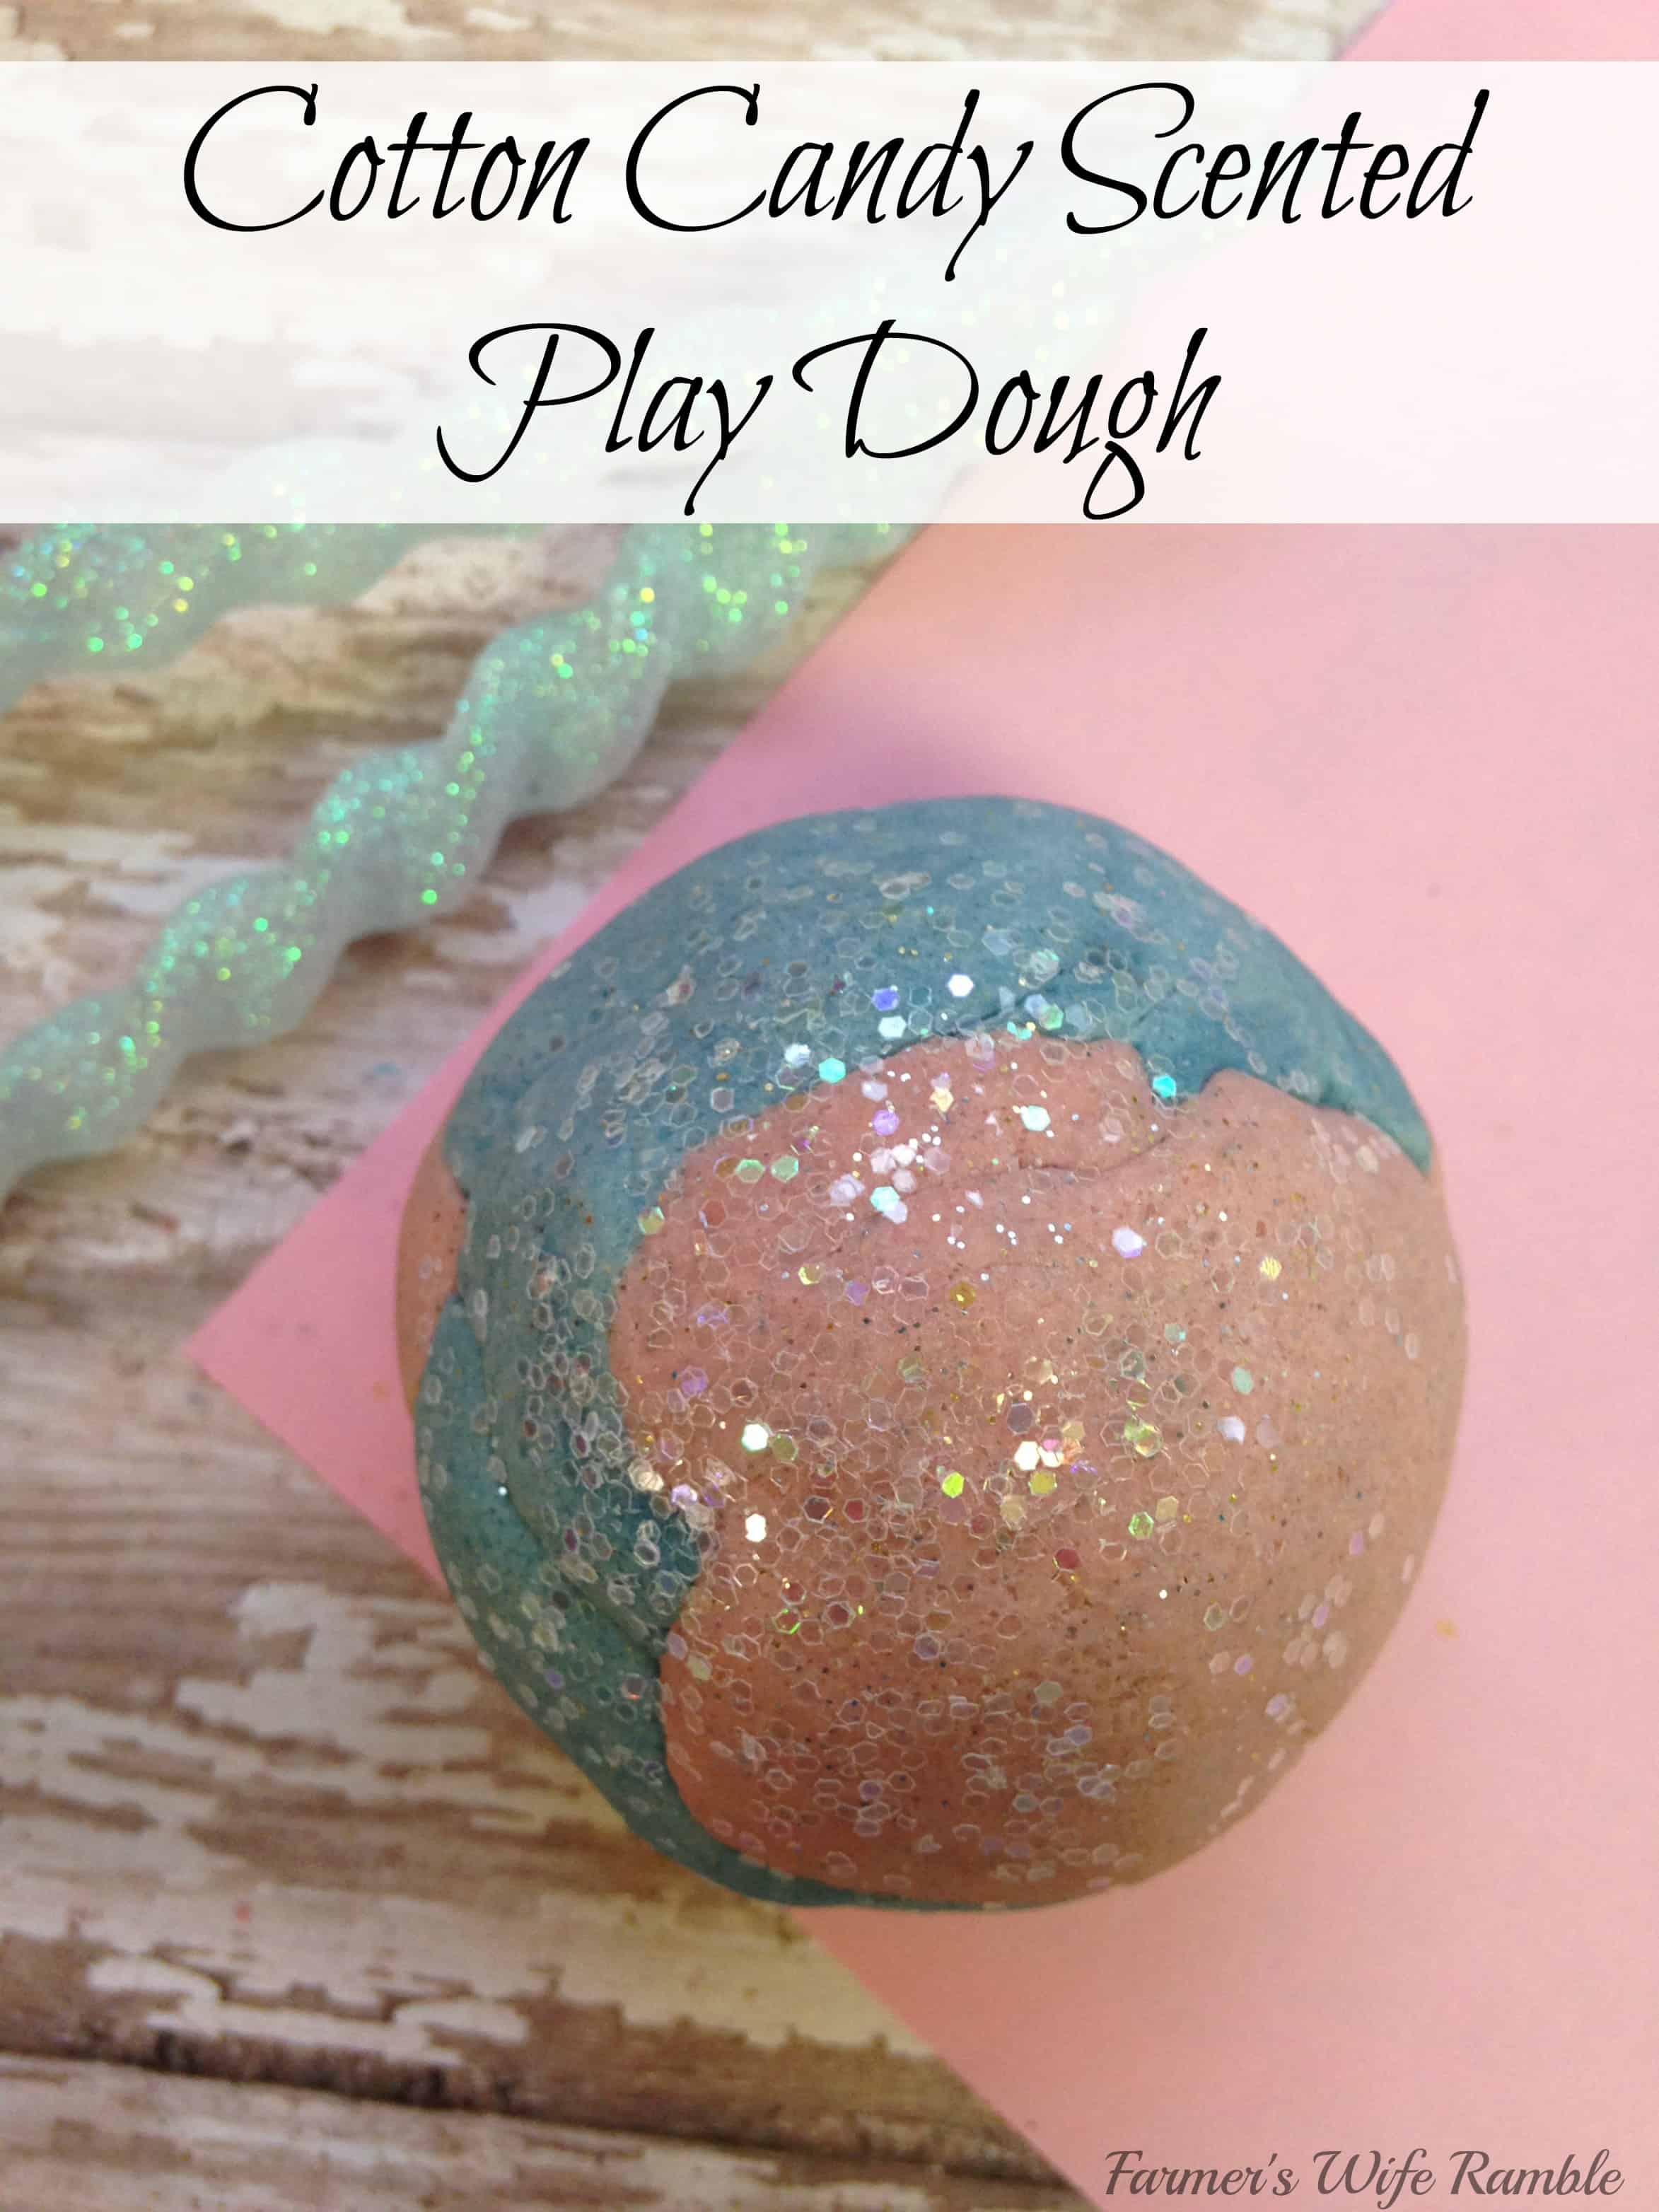 Do you need something fun to do with the kiddos? This easy cotton candy scented recipe for playdough is just the thing! - Farmer's Wife Rambles